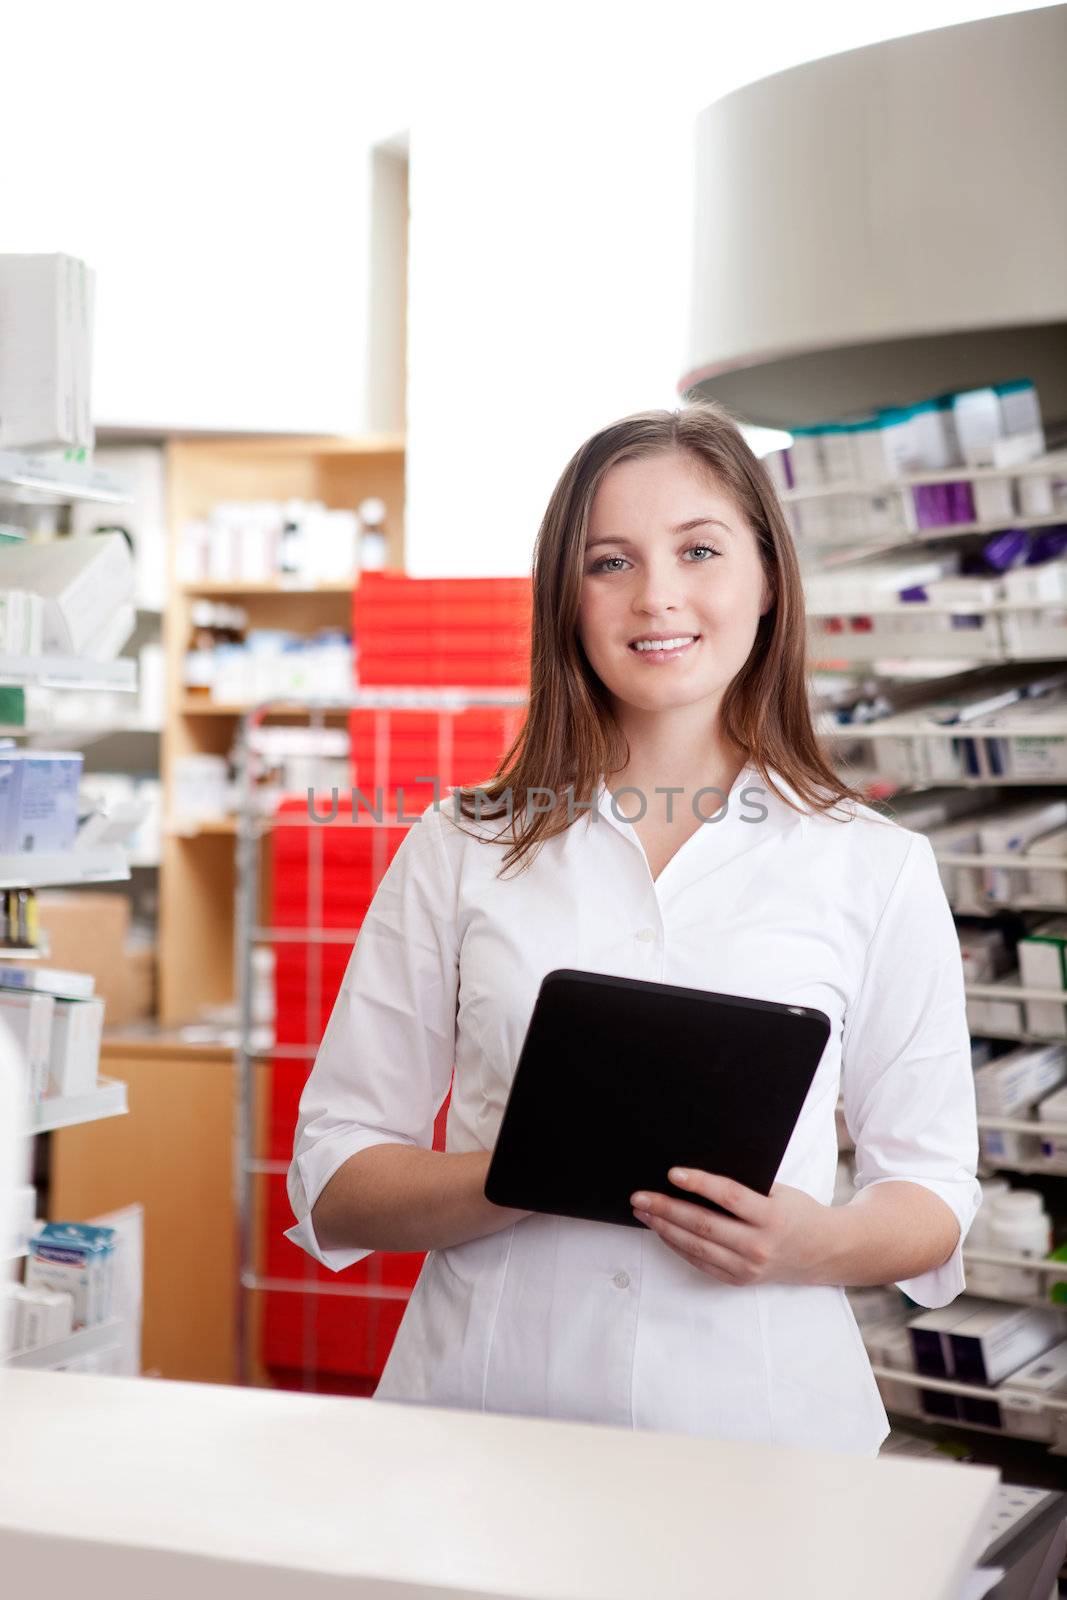 Portrait Of Female Pharmacist Holding Tablet Pc by leaf